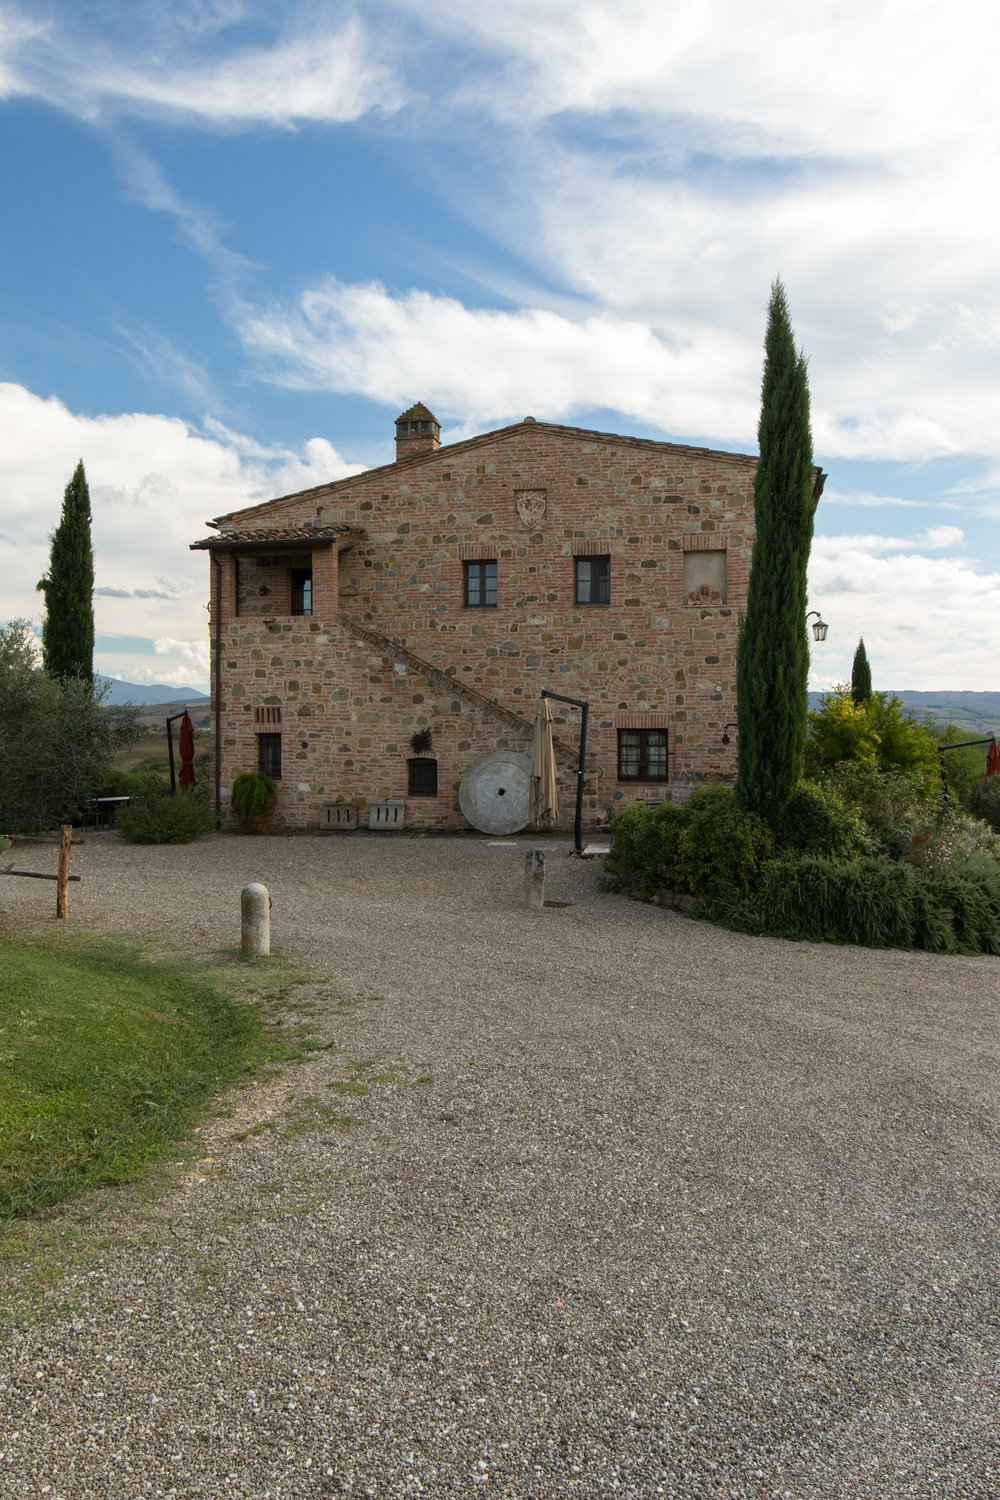 Agriturismo Podere Cunina, Tuscany, Italy | Reid Burchell Photography